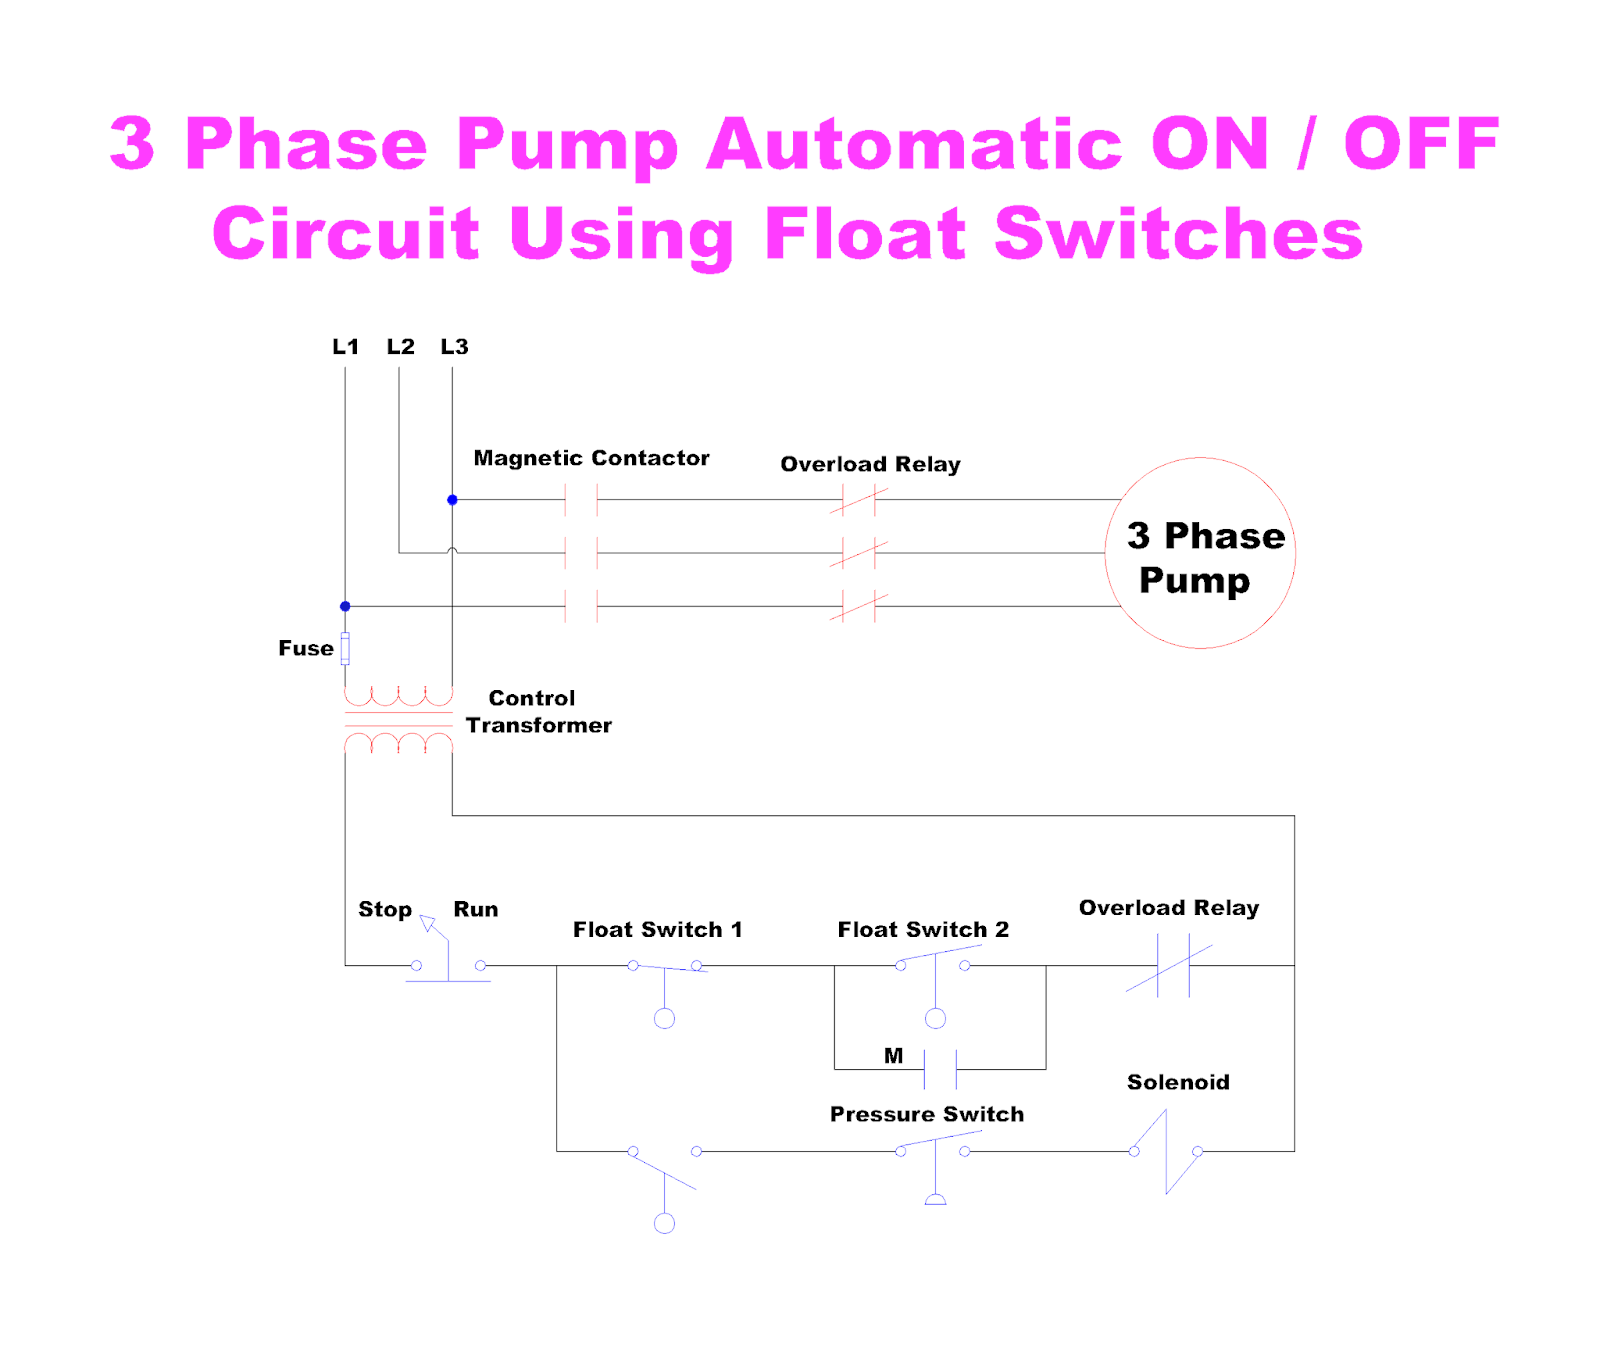 3 Phase Pump Automatic ON and OFF Circuit Using Float Switches